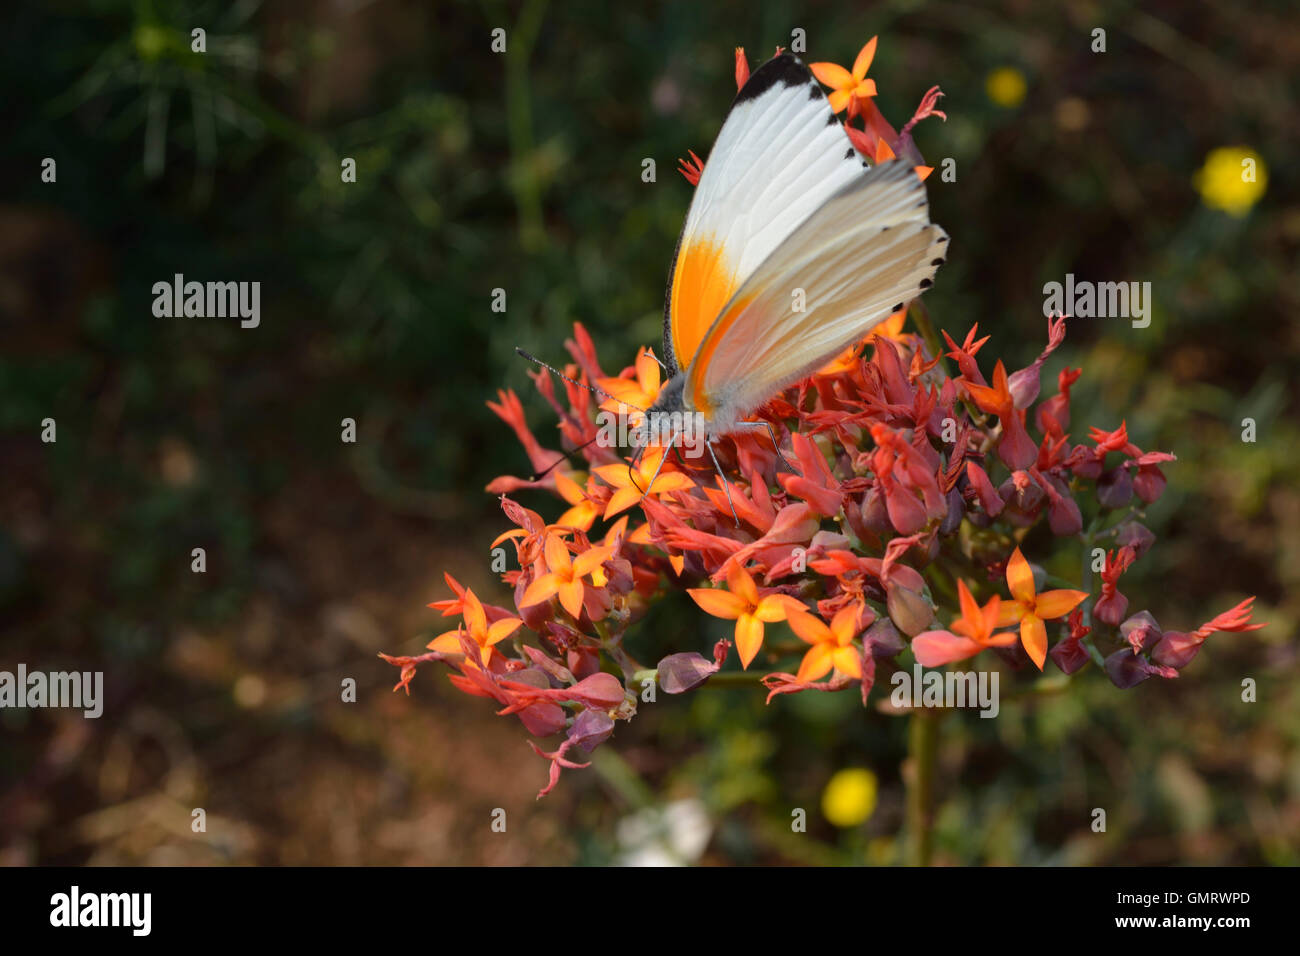 Eastern Dotted Border or Common Dotted Border (Mylothris agathina) white and orange butterfly with black trim on its wings Stock Photo